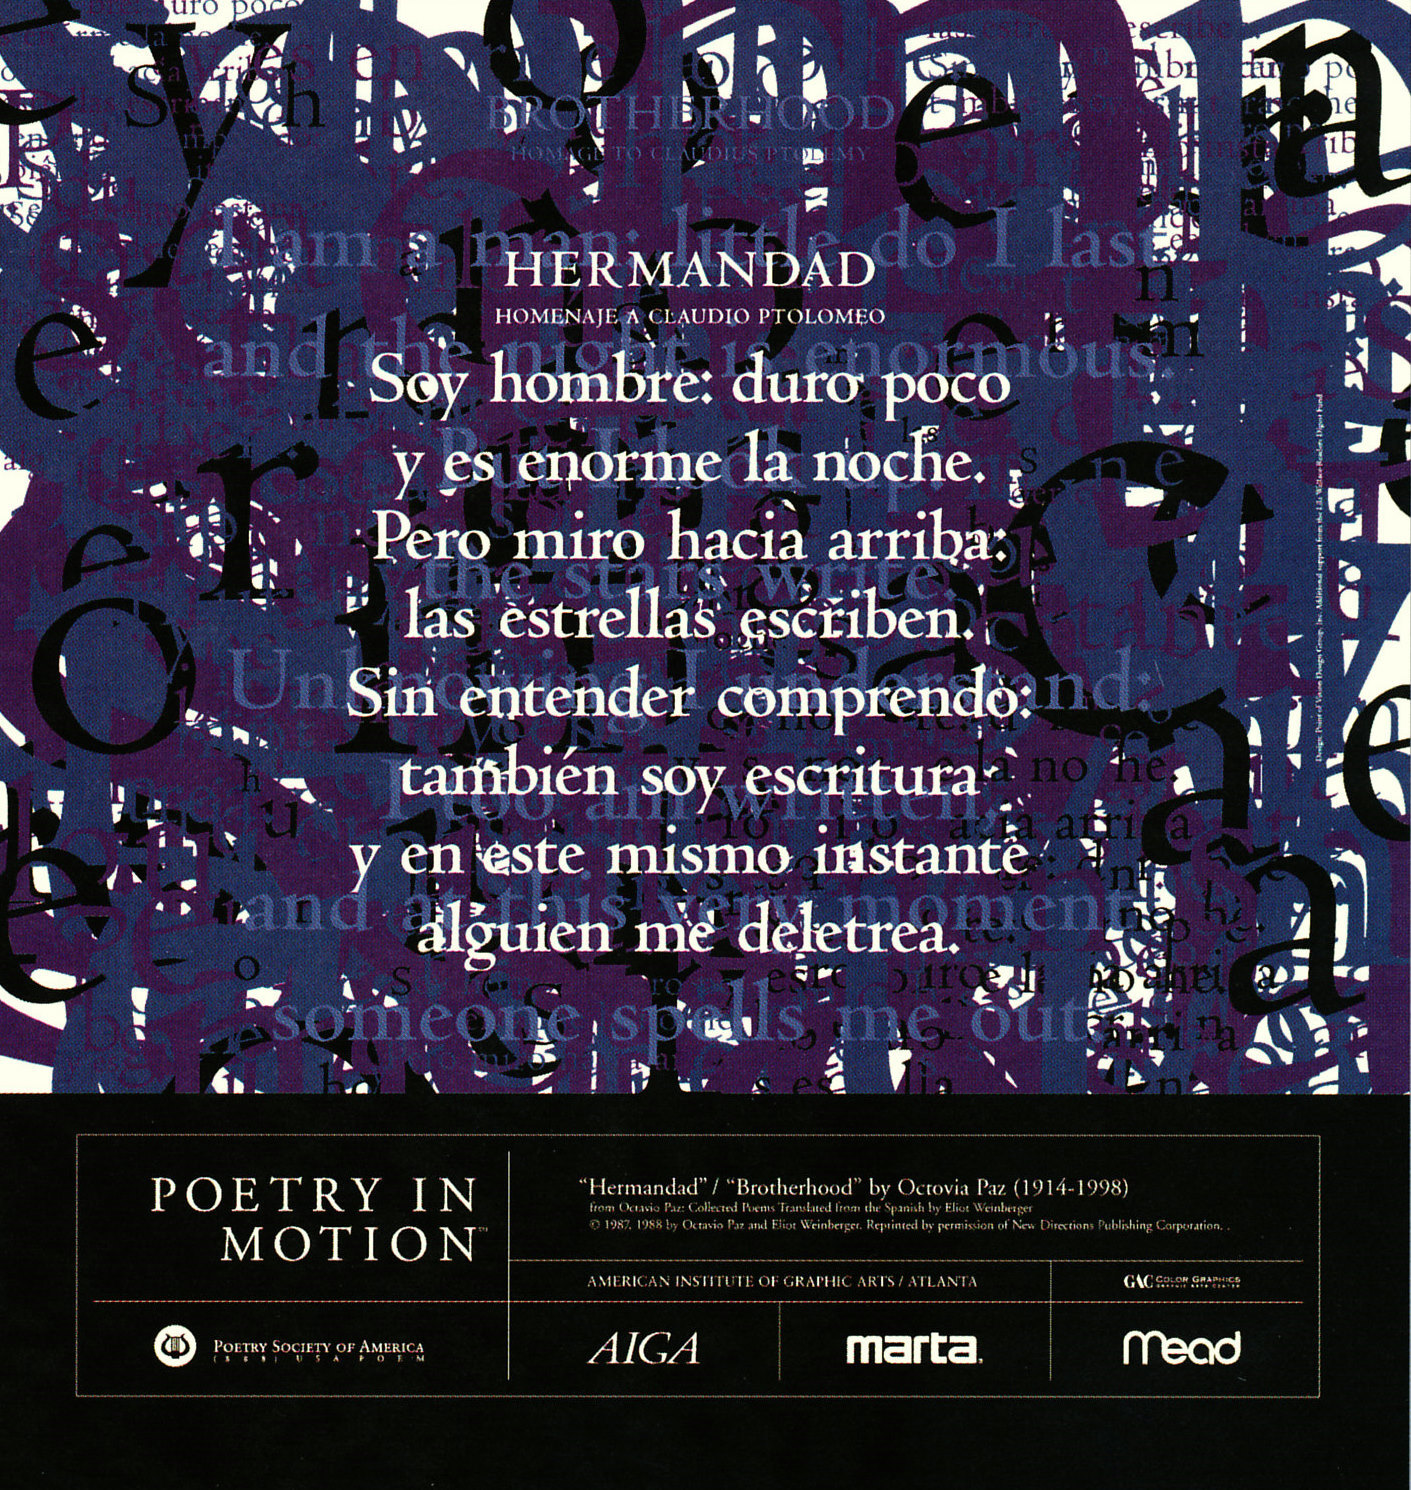 A square poster depicting a jumble of blue, purple, and black letters features a poem titled Hermandad by Octavio Paz.